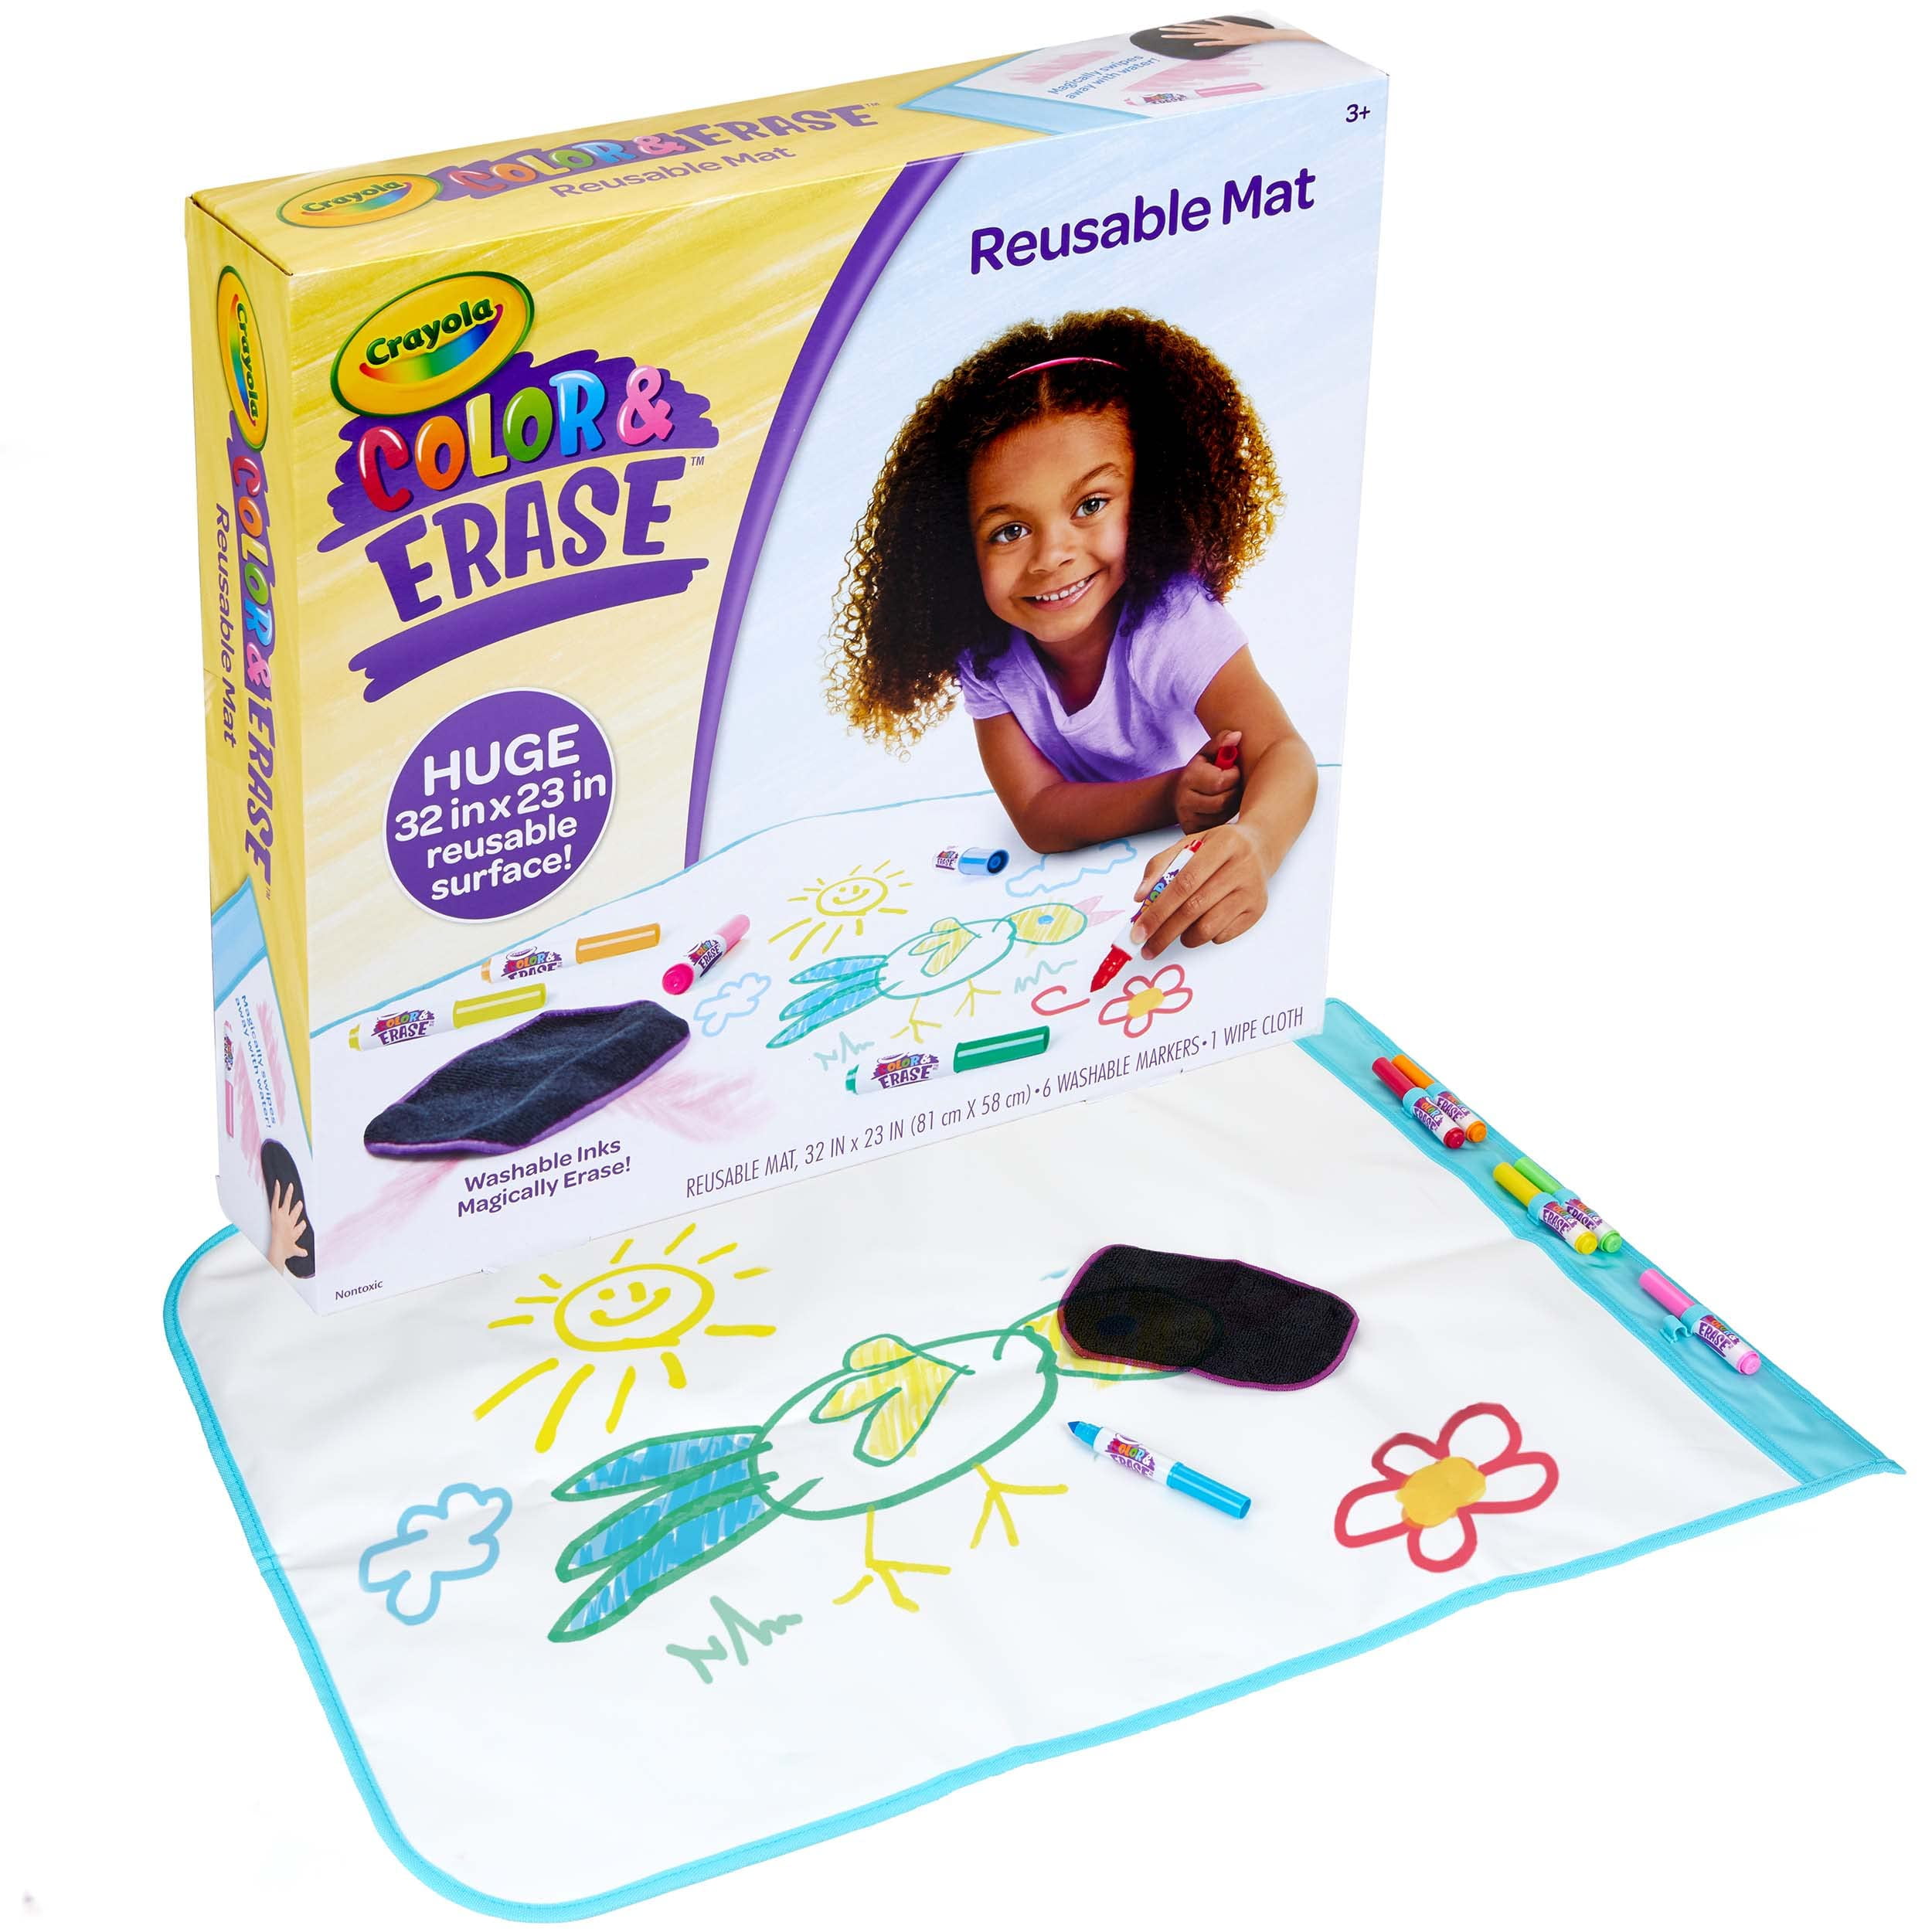 Crayola Scribble Scrubbie Peculiar Zoo Mess Free Playset, Holiday Toys,  Gift for Beginner Child 